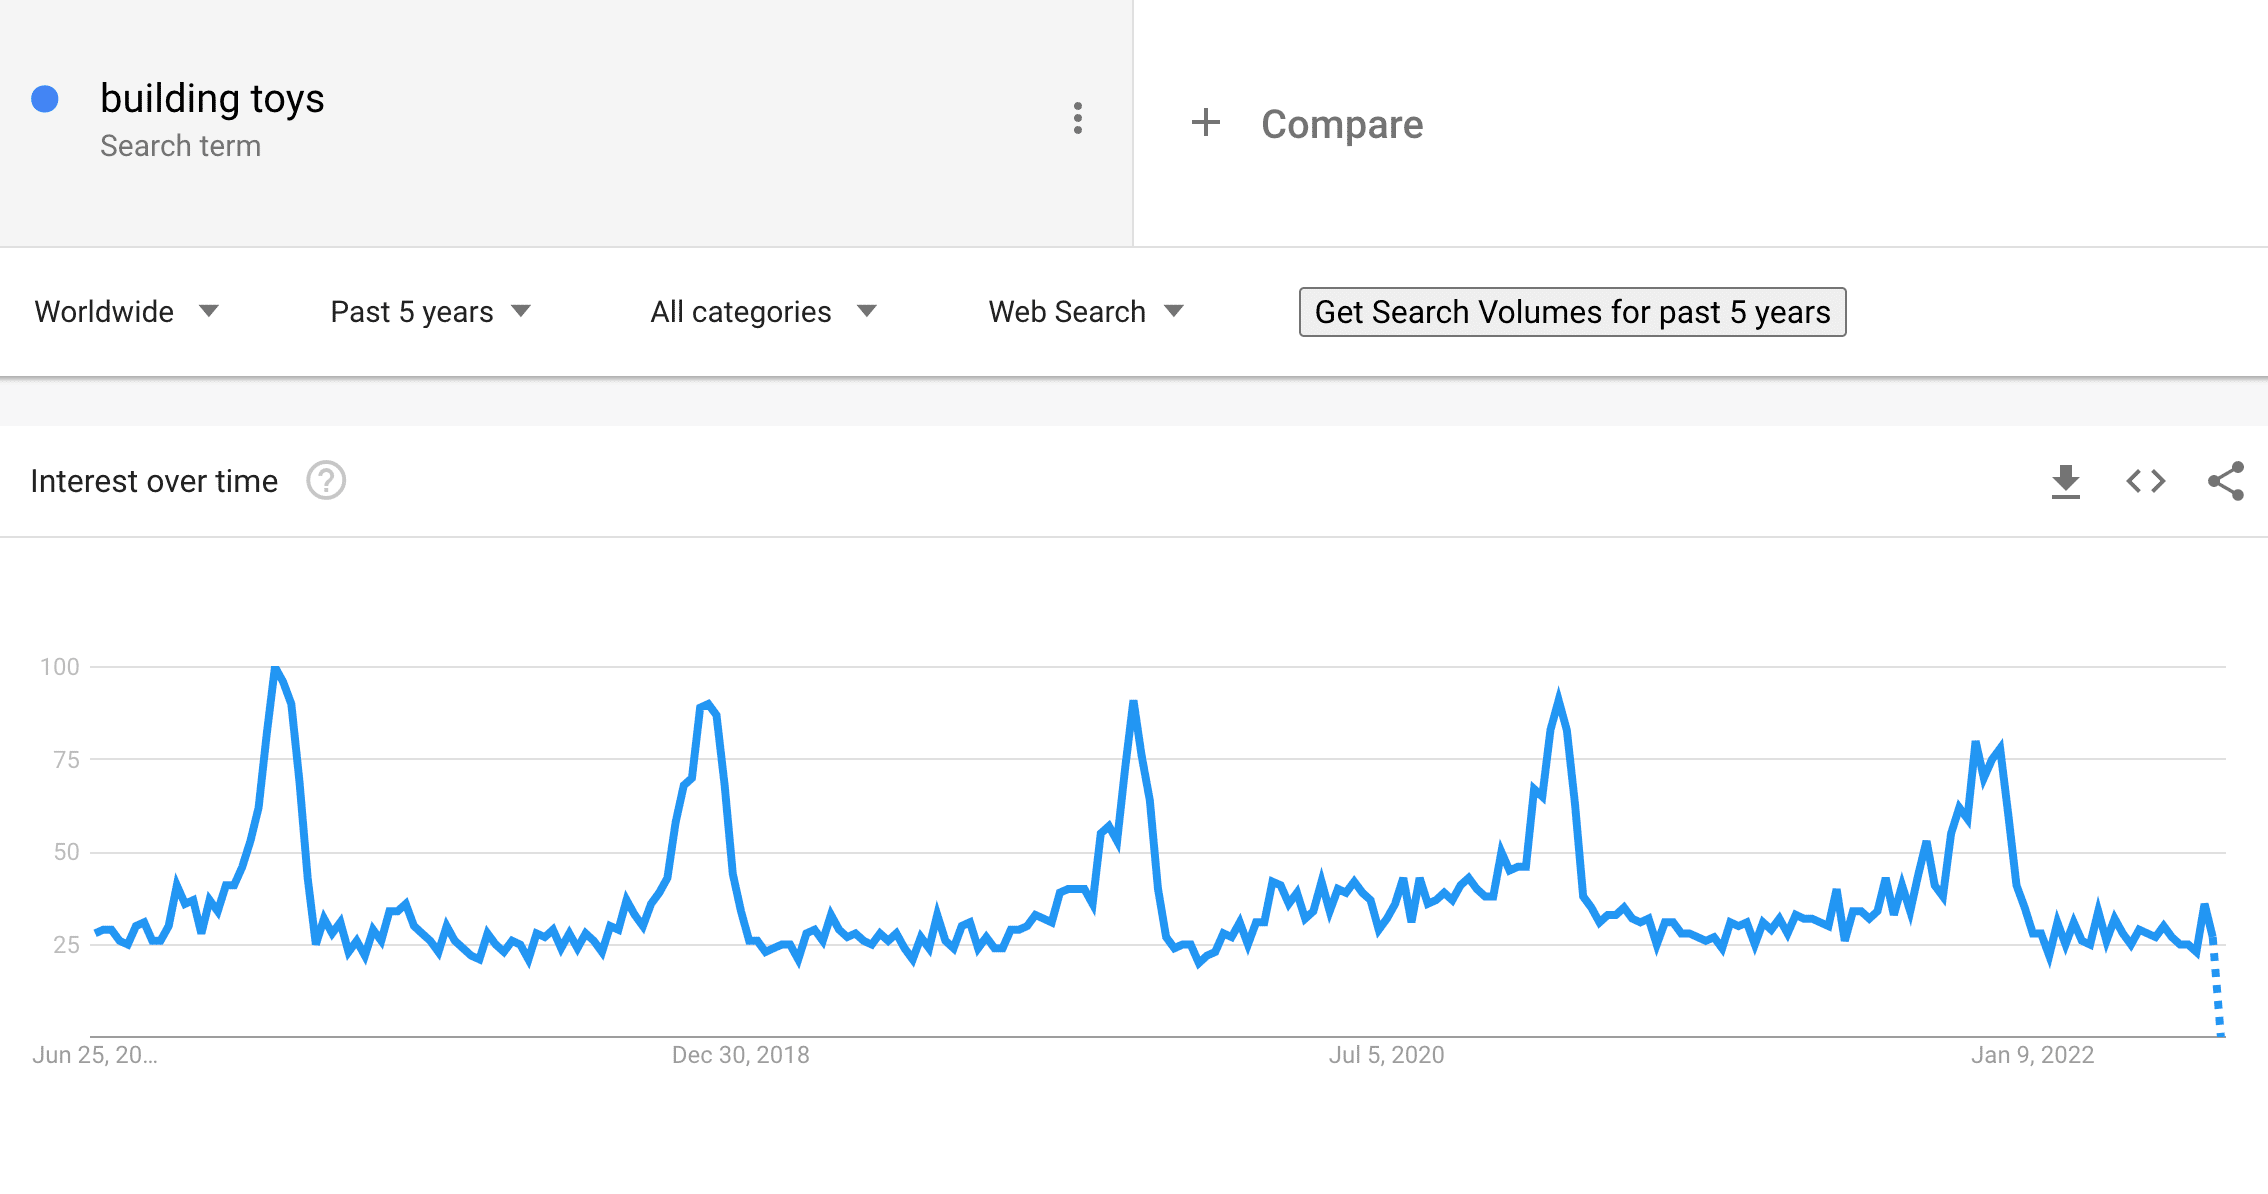 Building toys on Google Trends